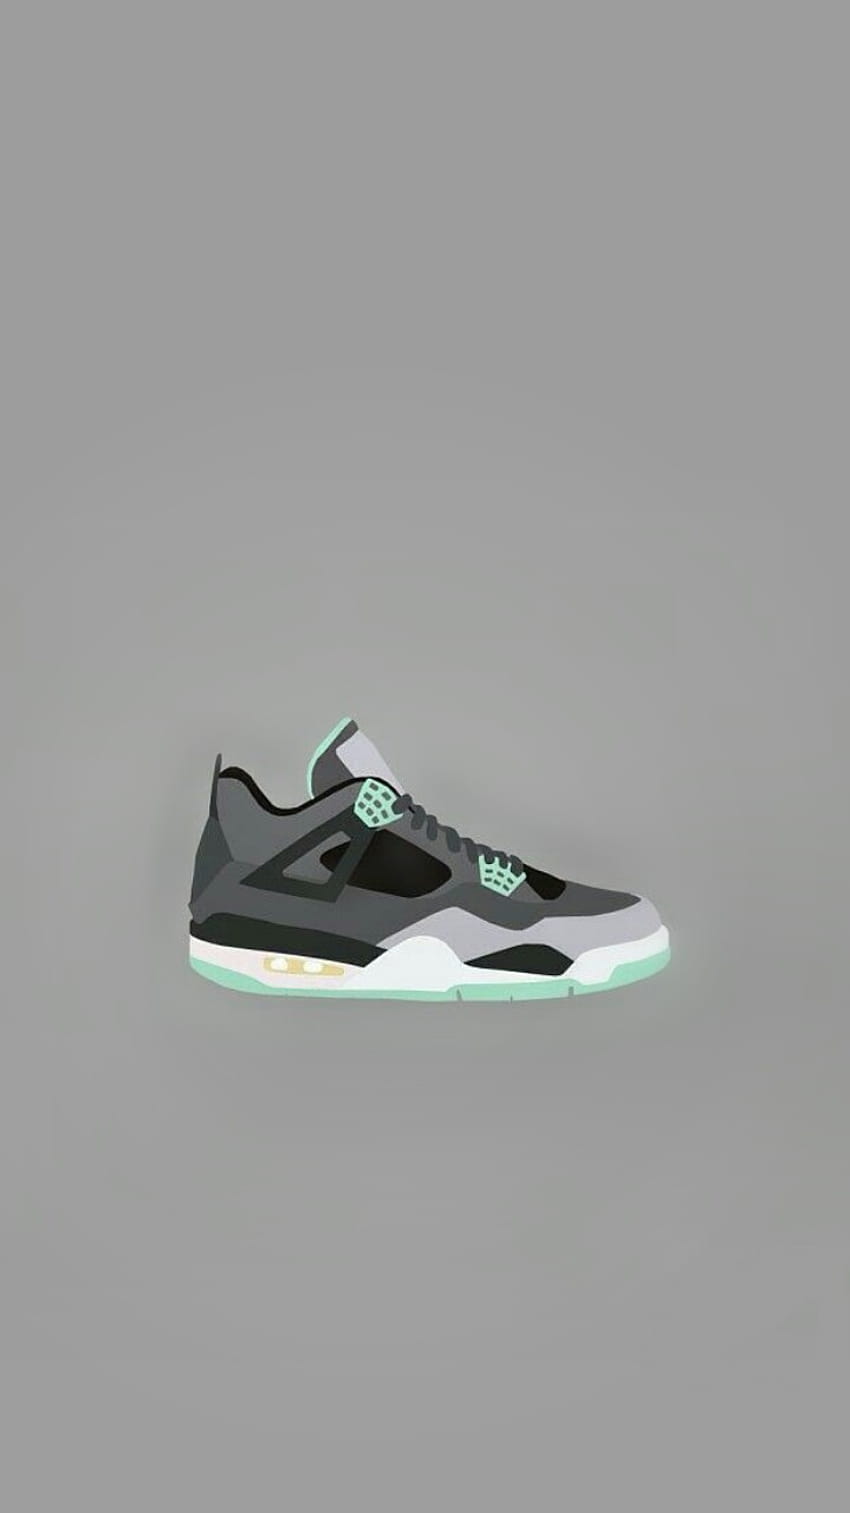 A pair of black and green sneakers on a grey background - Air Jordan 5